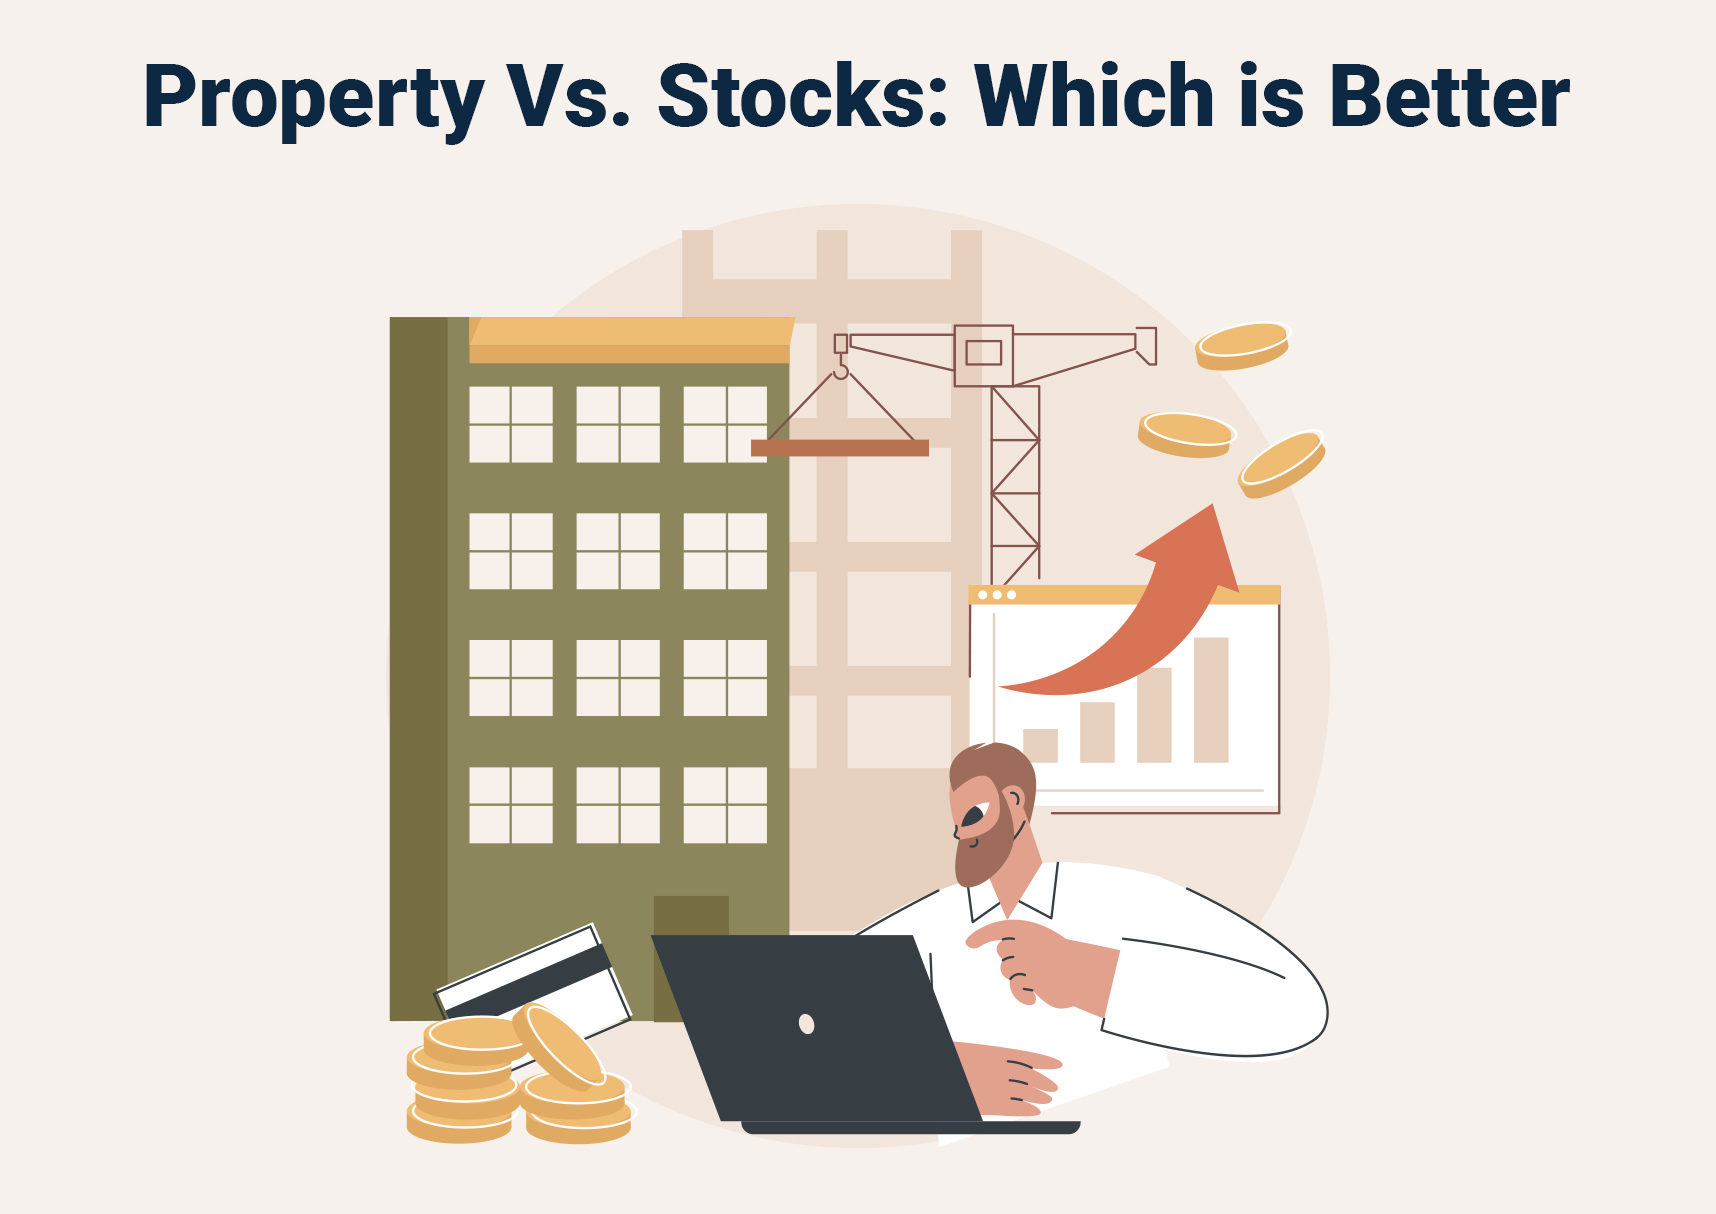 Property Vs. Stocks: Which is Better